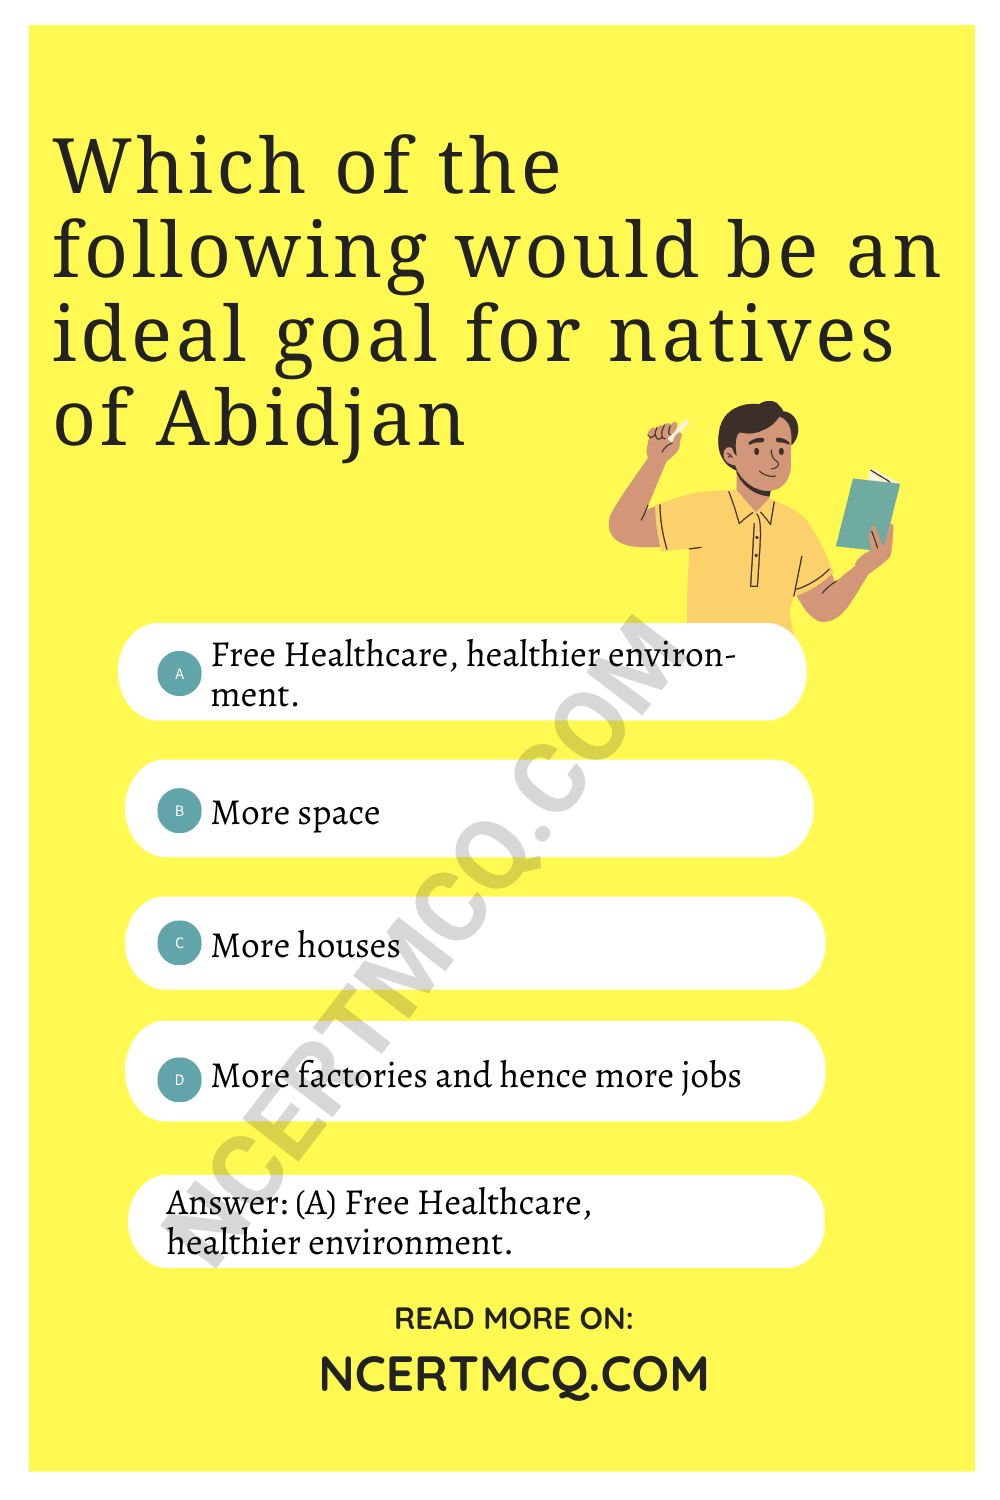 Which of the following would be an ideal goal for natives of Abidjan